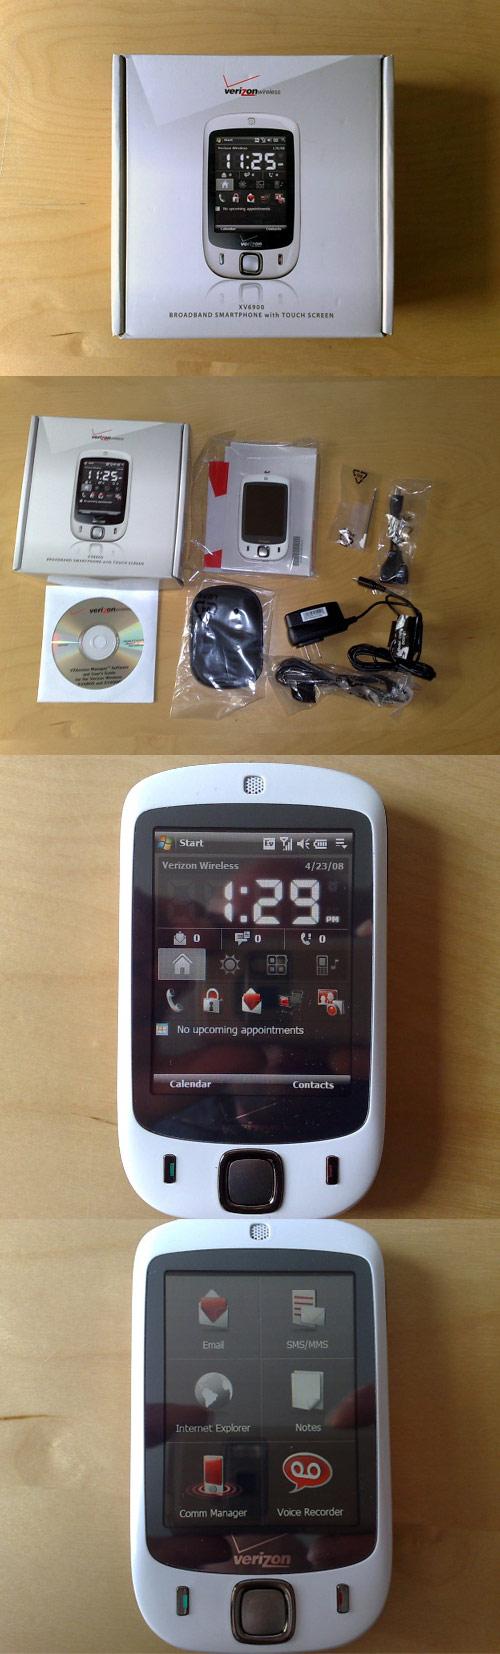 HTC Touch xv6900